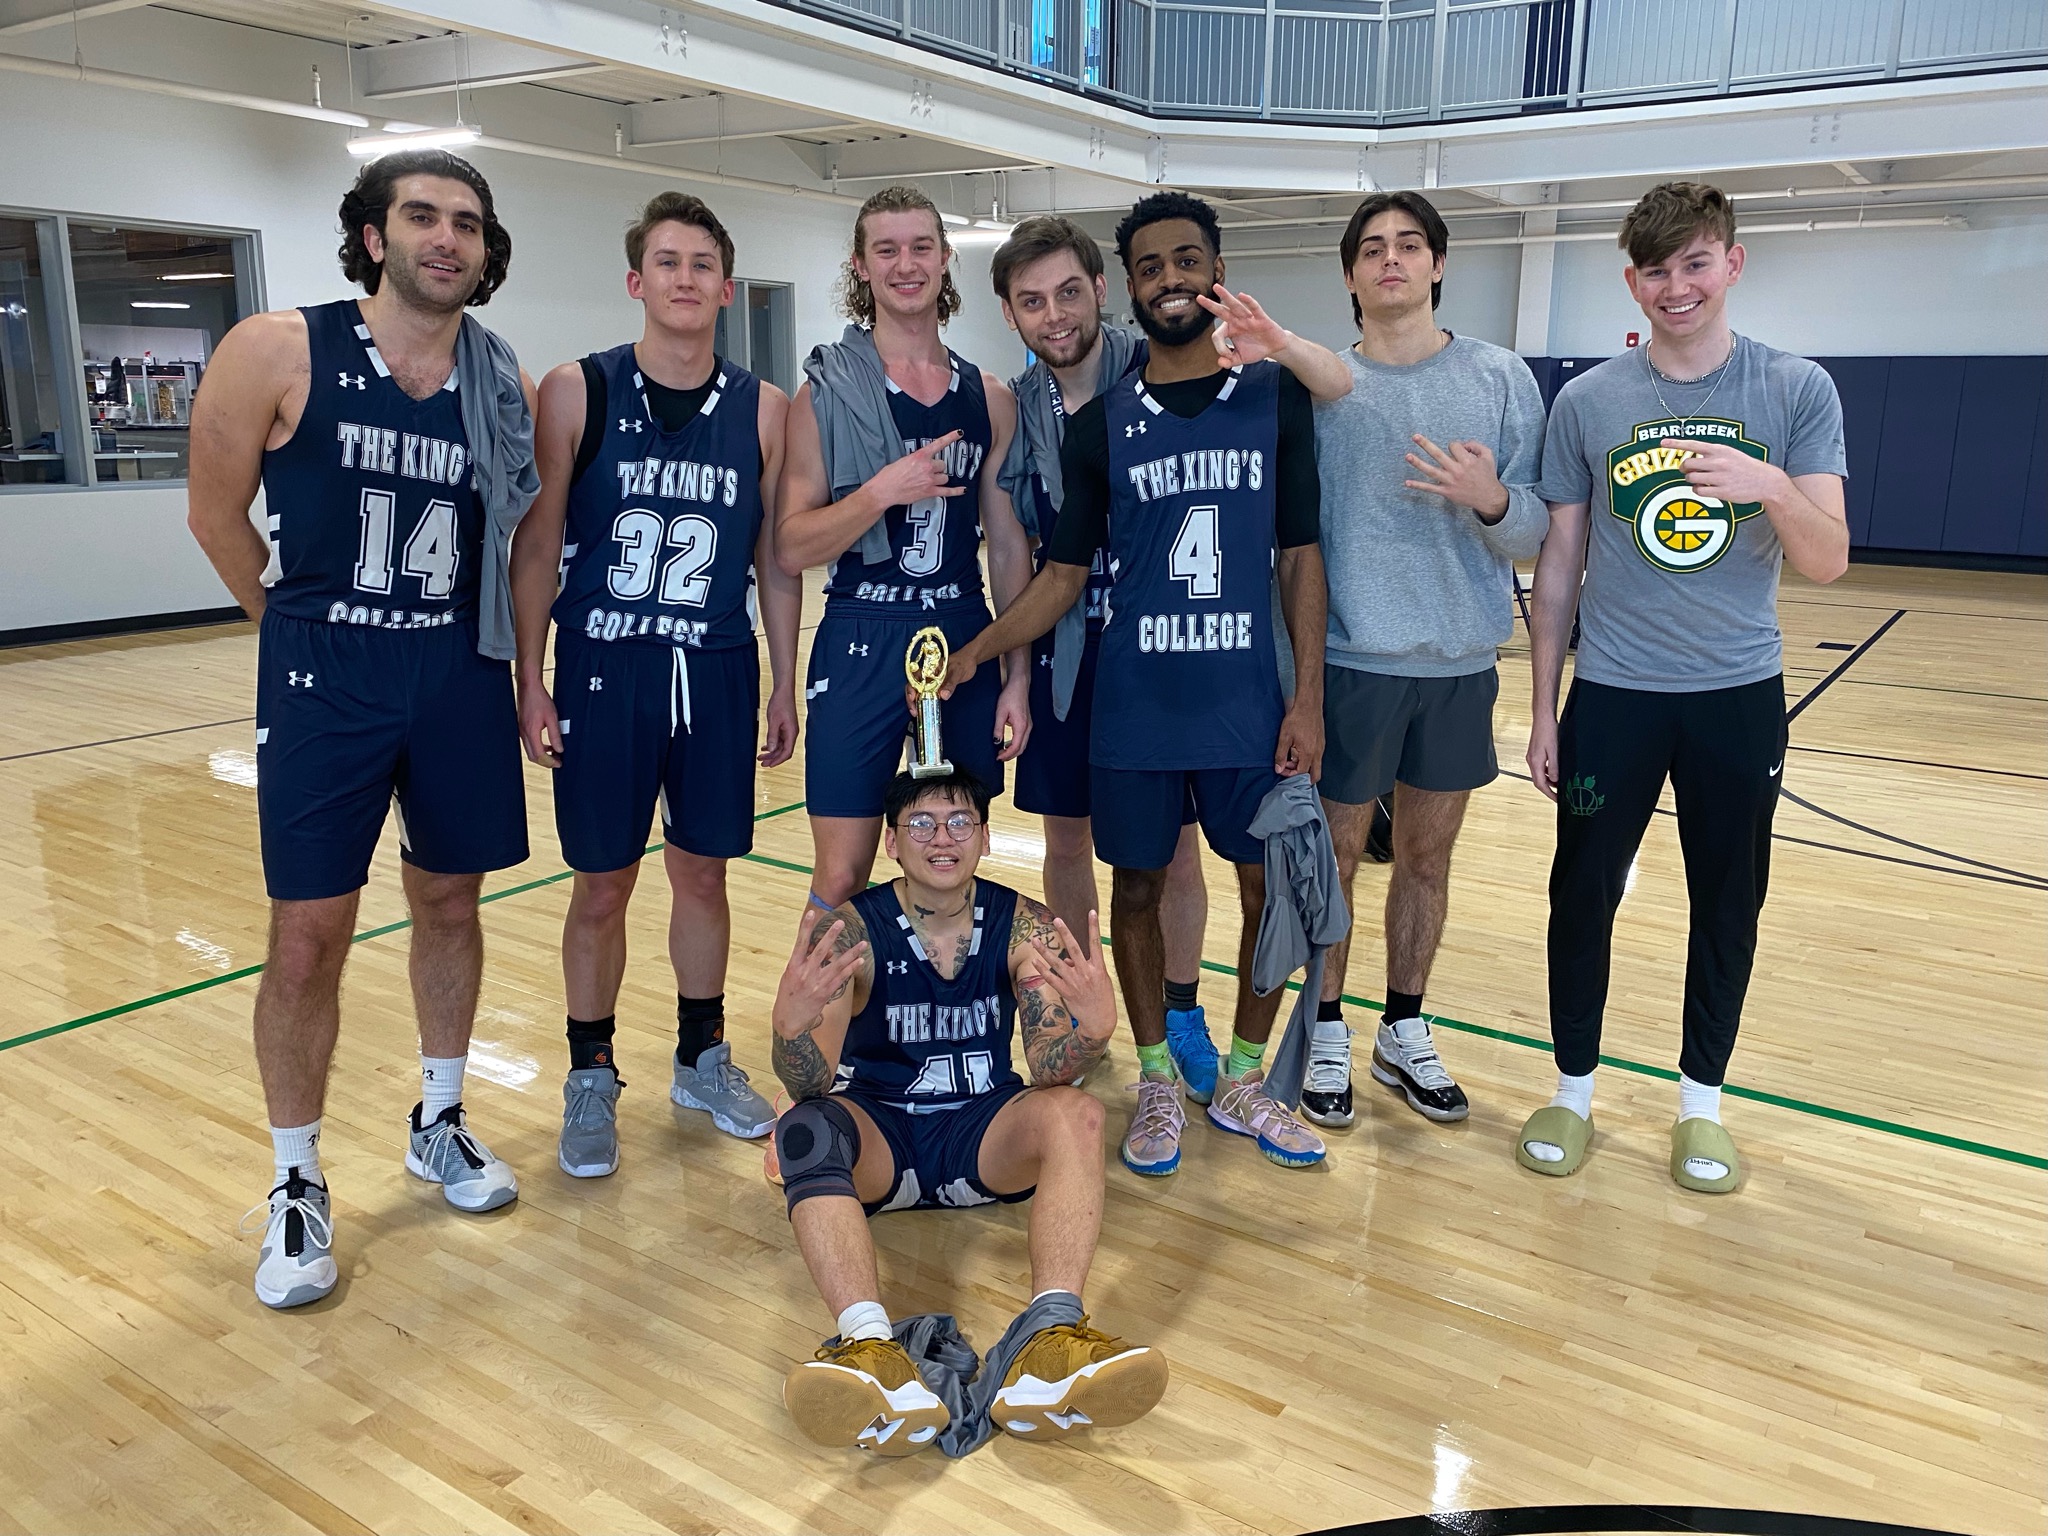 Lions Take Third at Bible College National Invitational